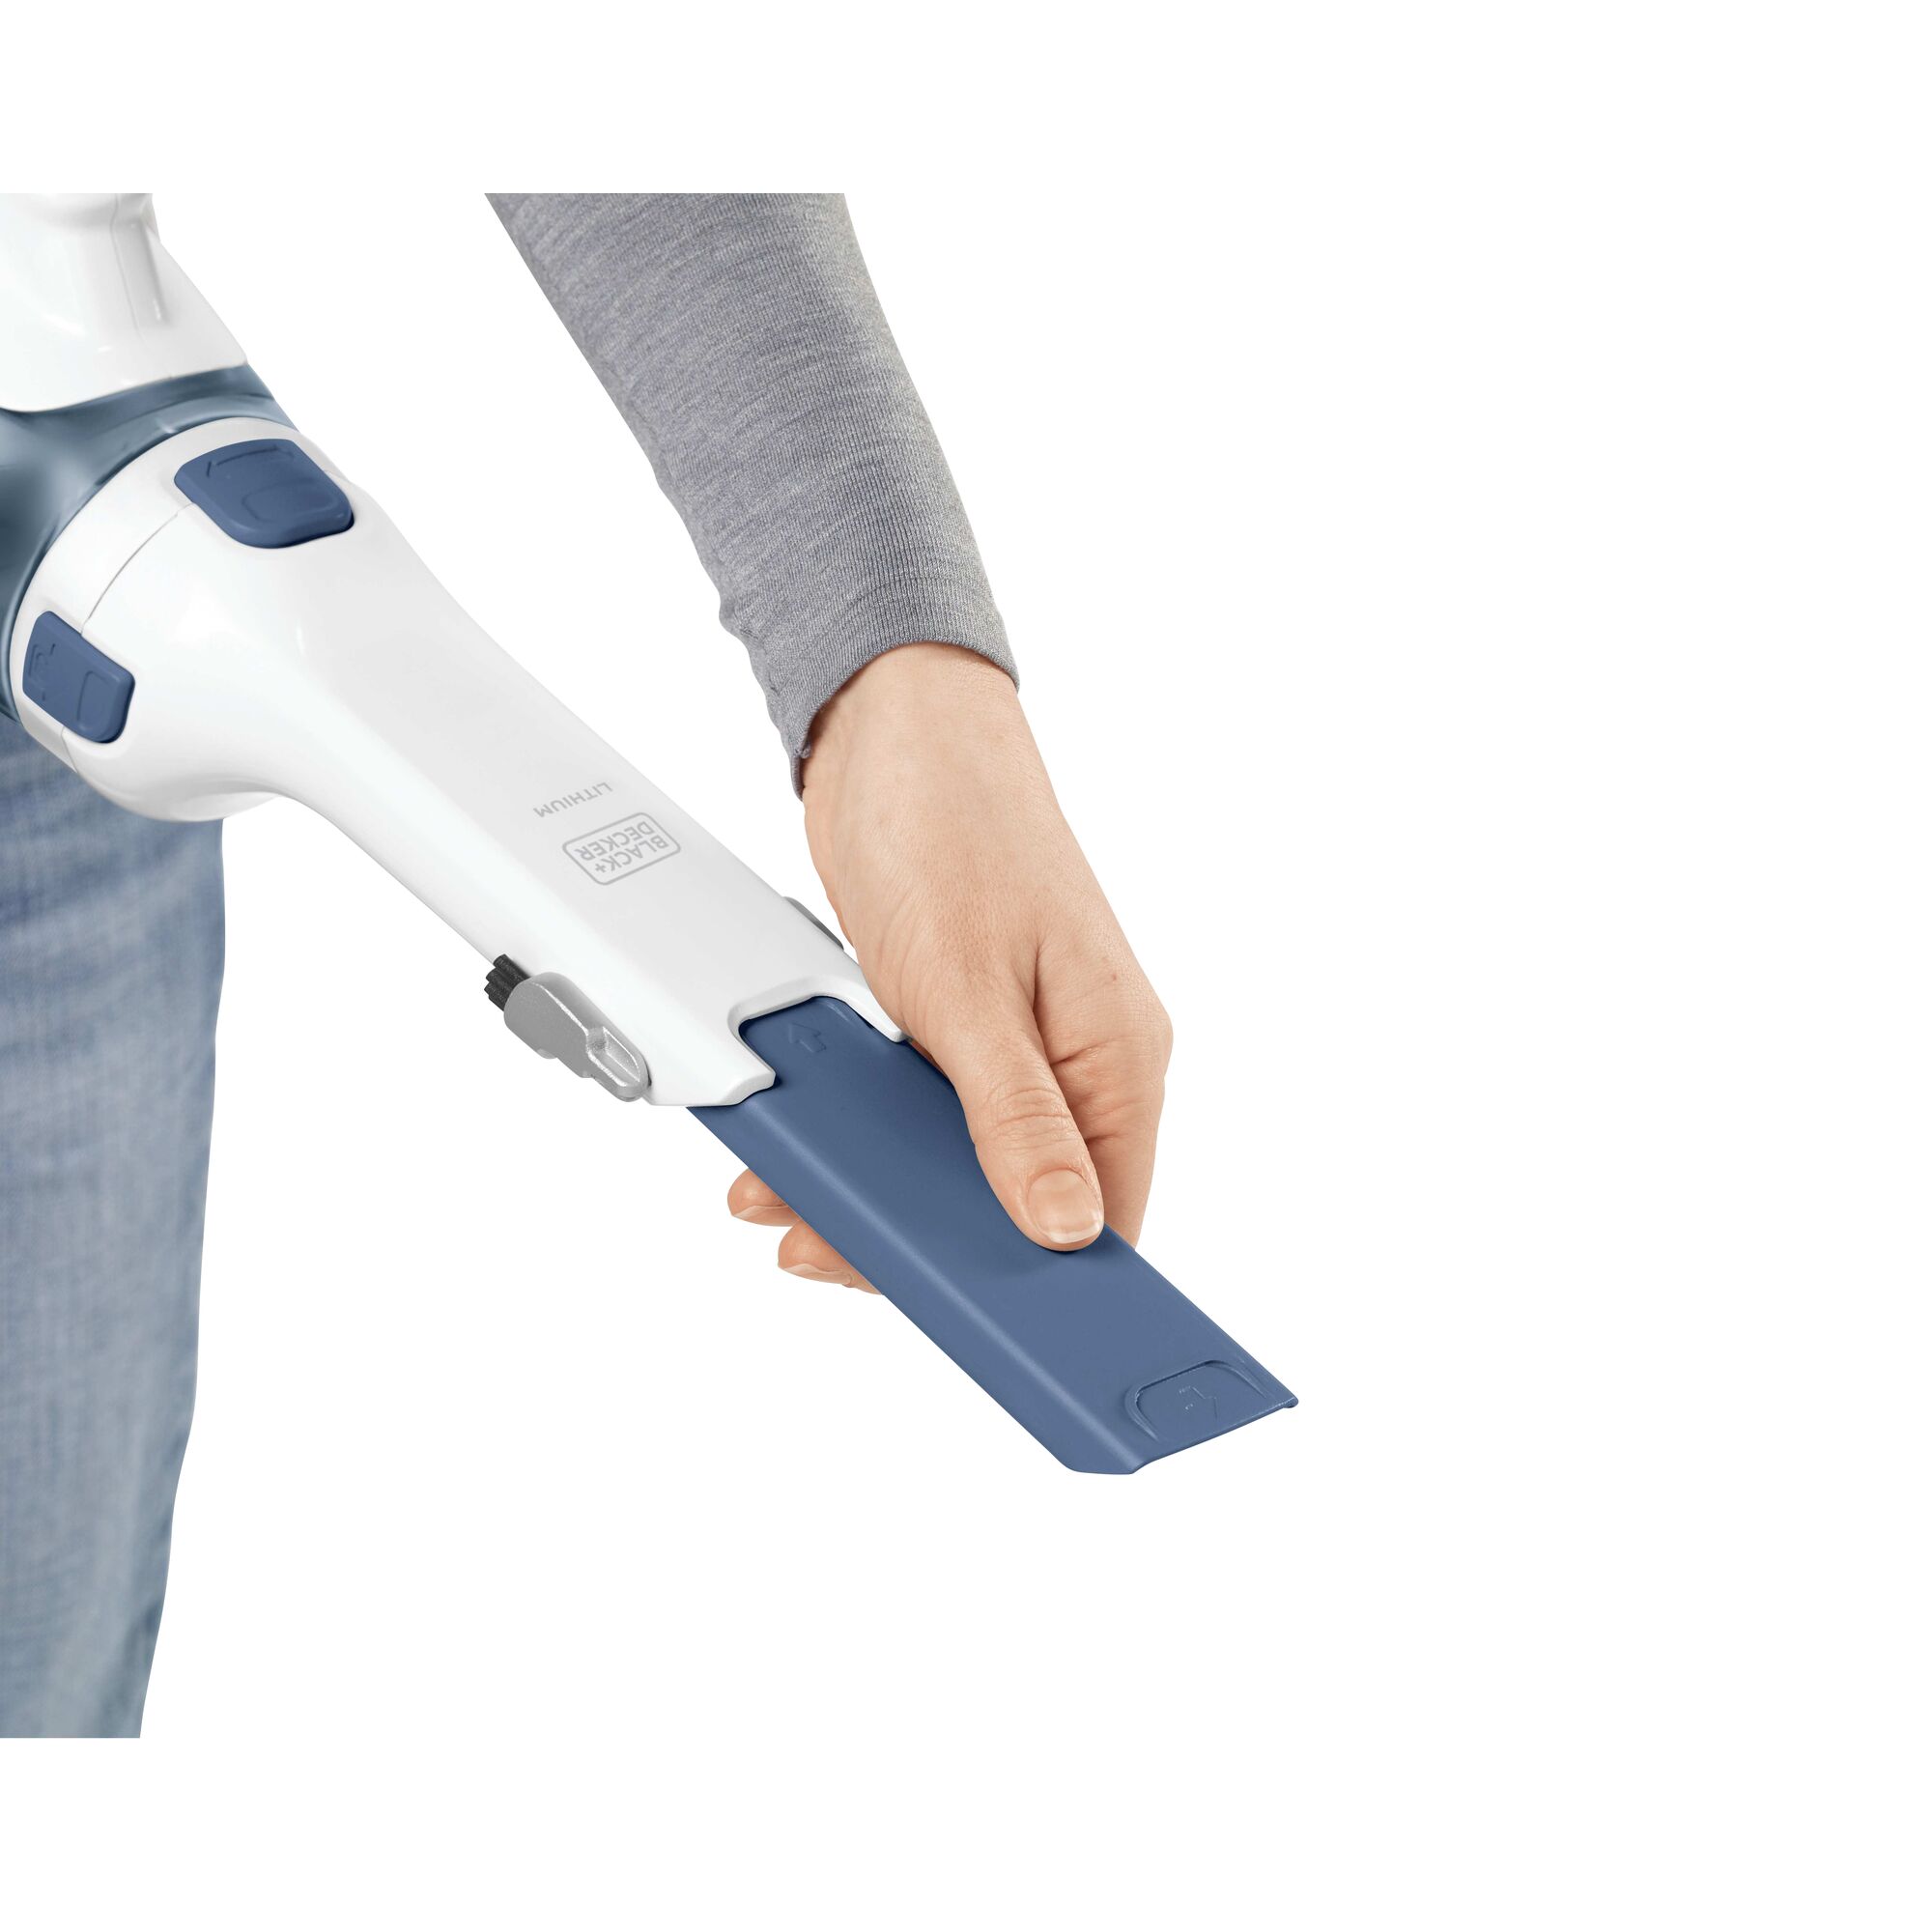 Adjustable nozzle feature of a dustbuster cordless hand vacuum.